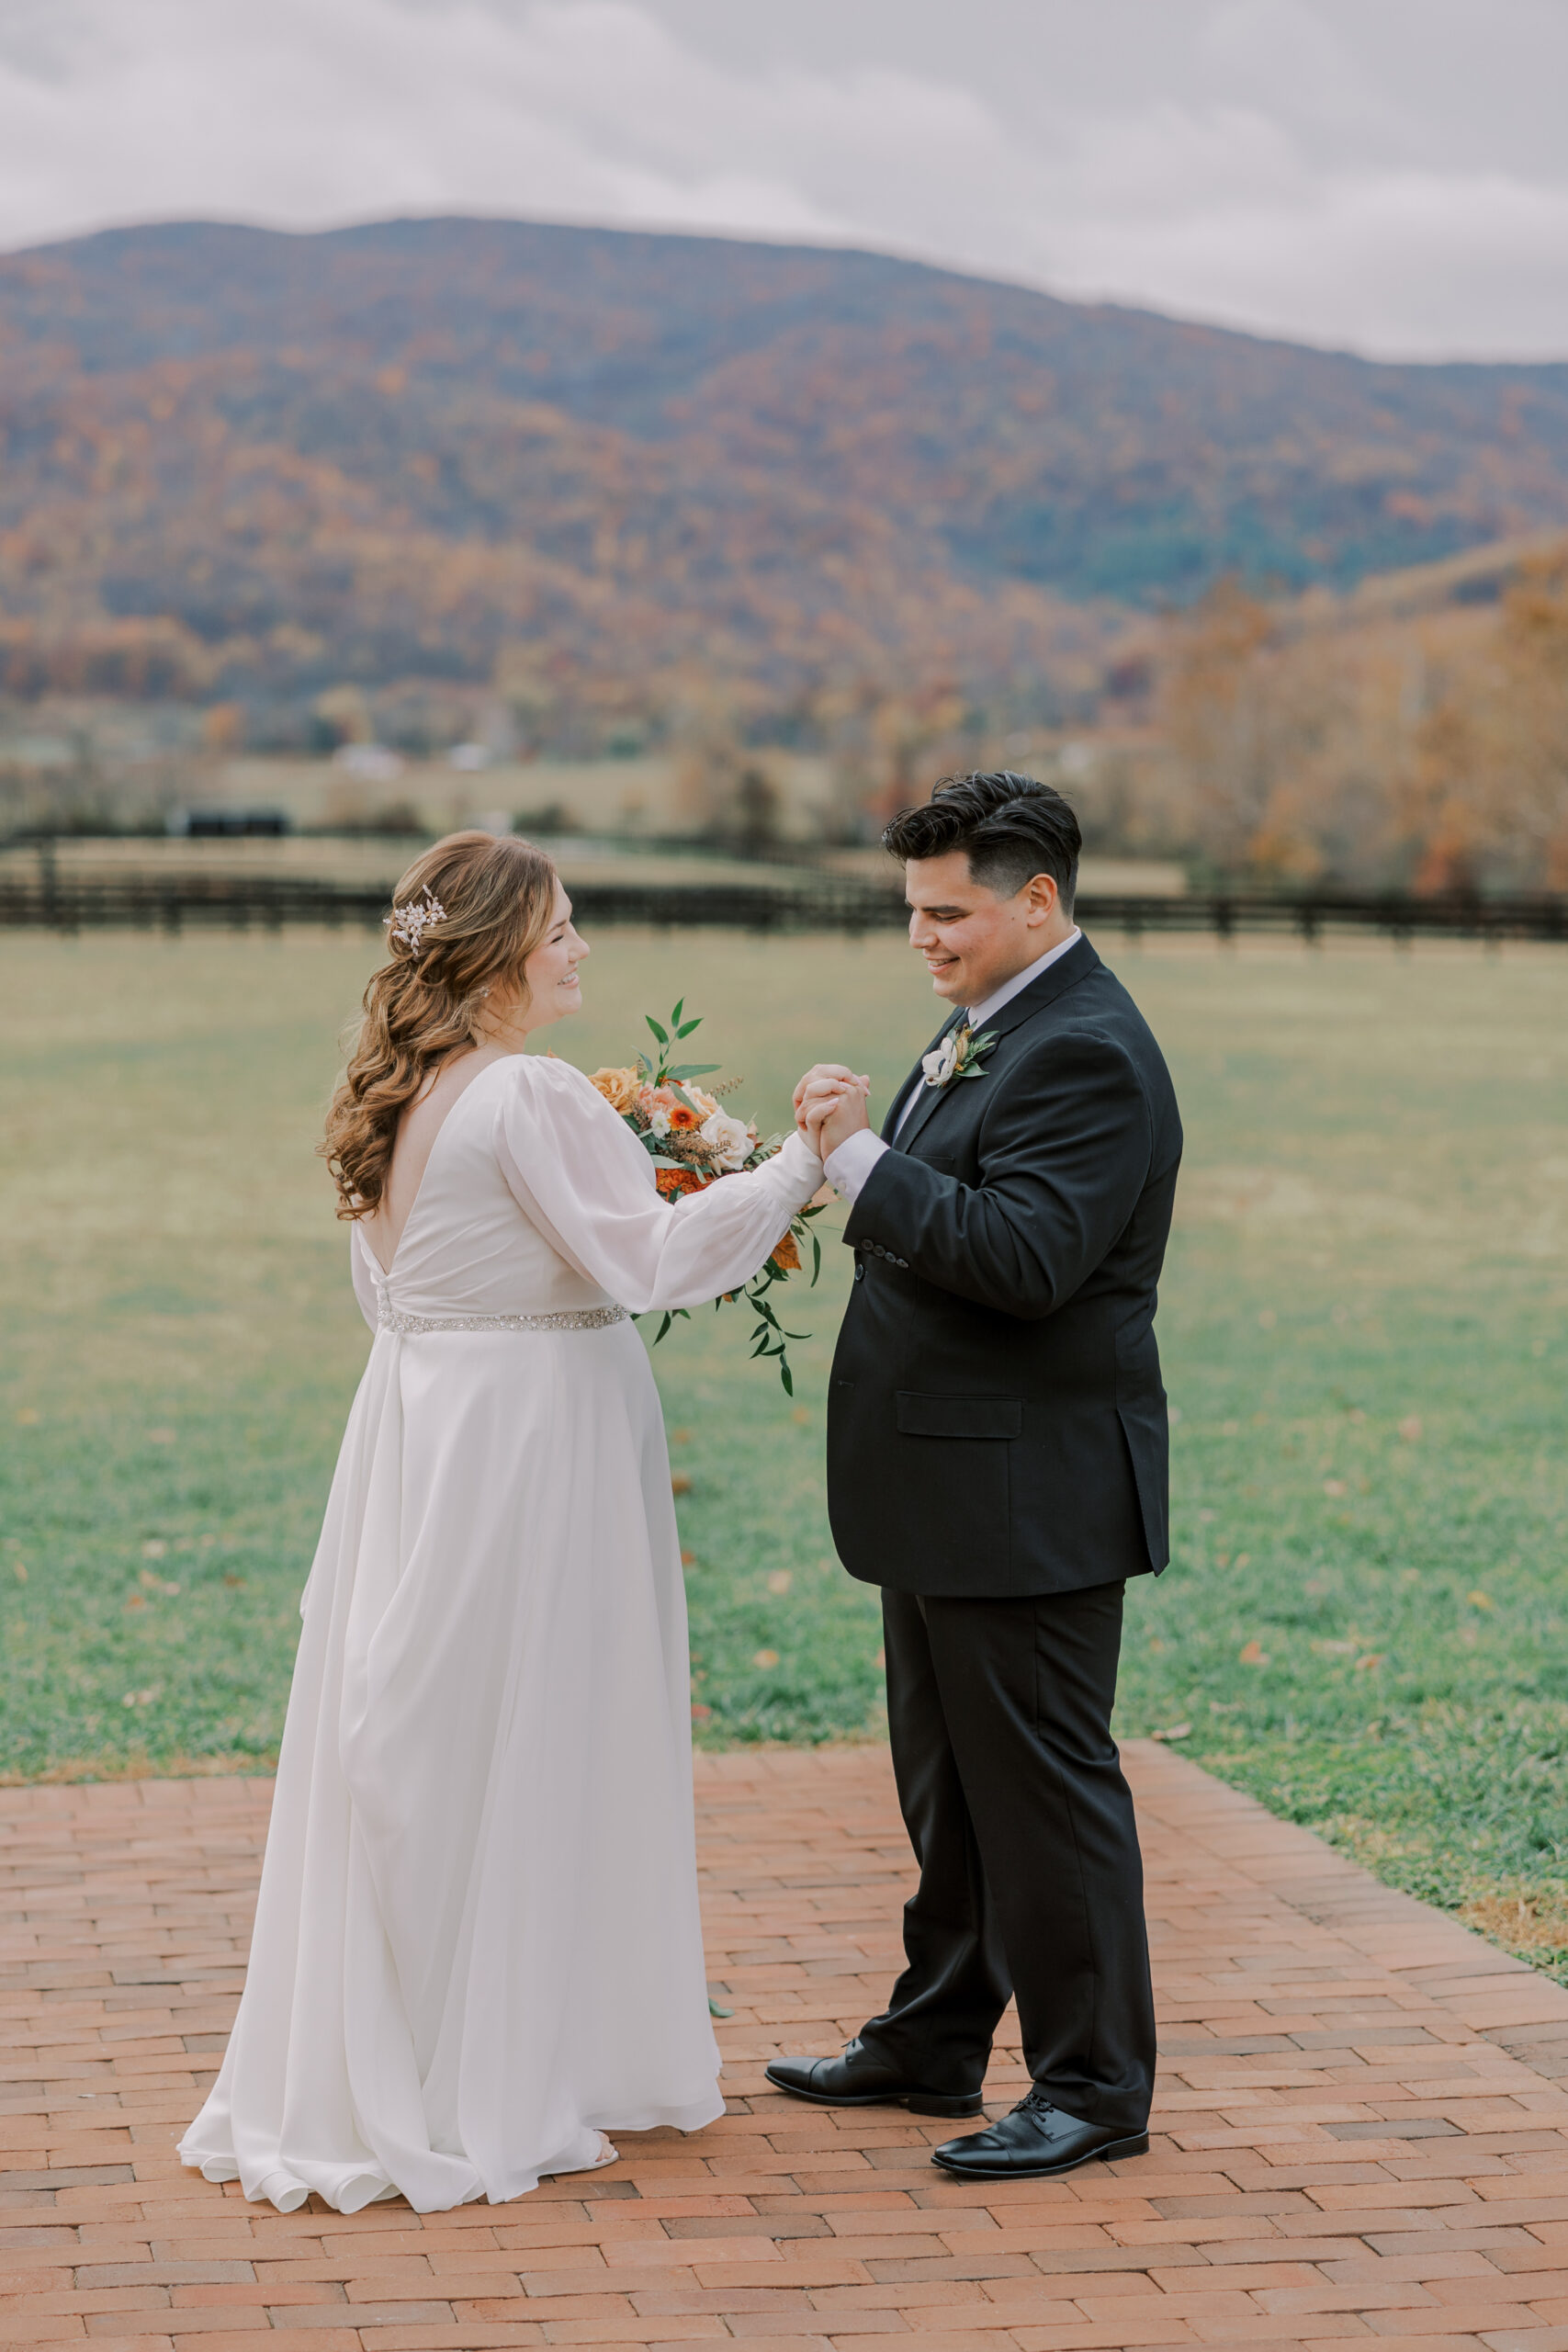 The bride and groom see each other for the first time during their first look at their King Family Vineyards wedding.